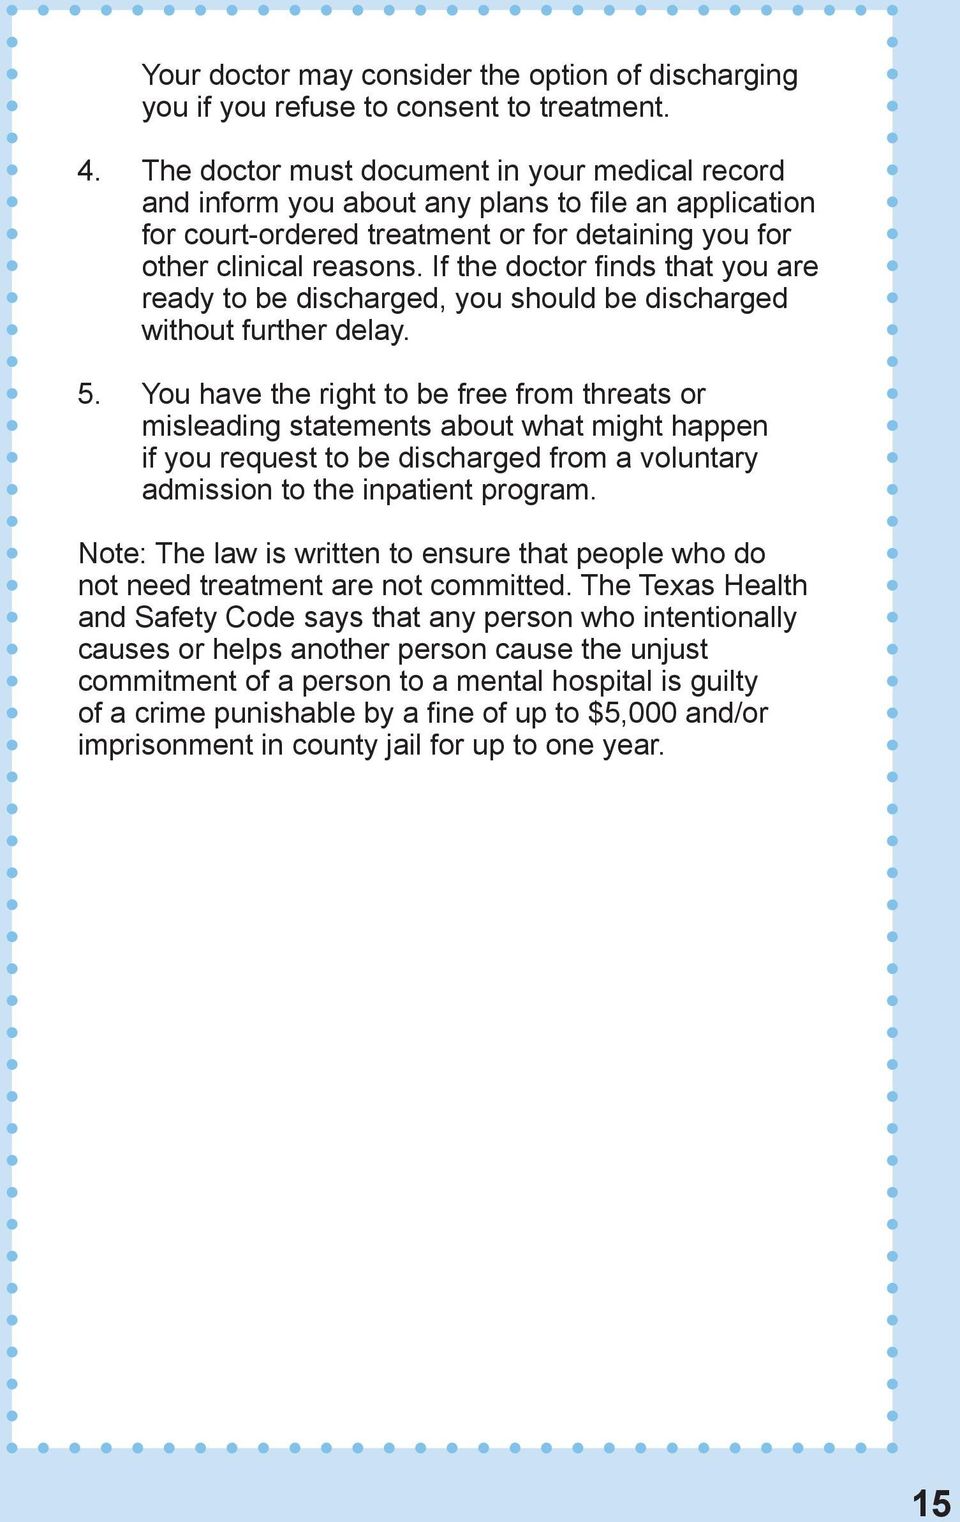 If the doctor finds that you are ready to be discharged, you should be discharged without further delay. 5.